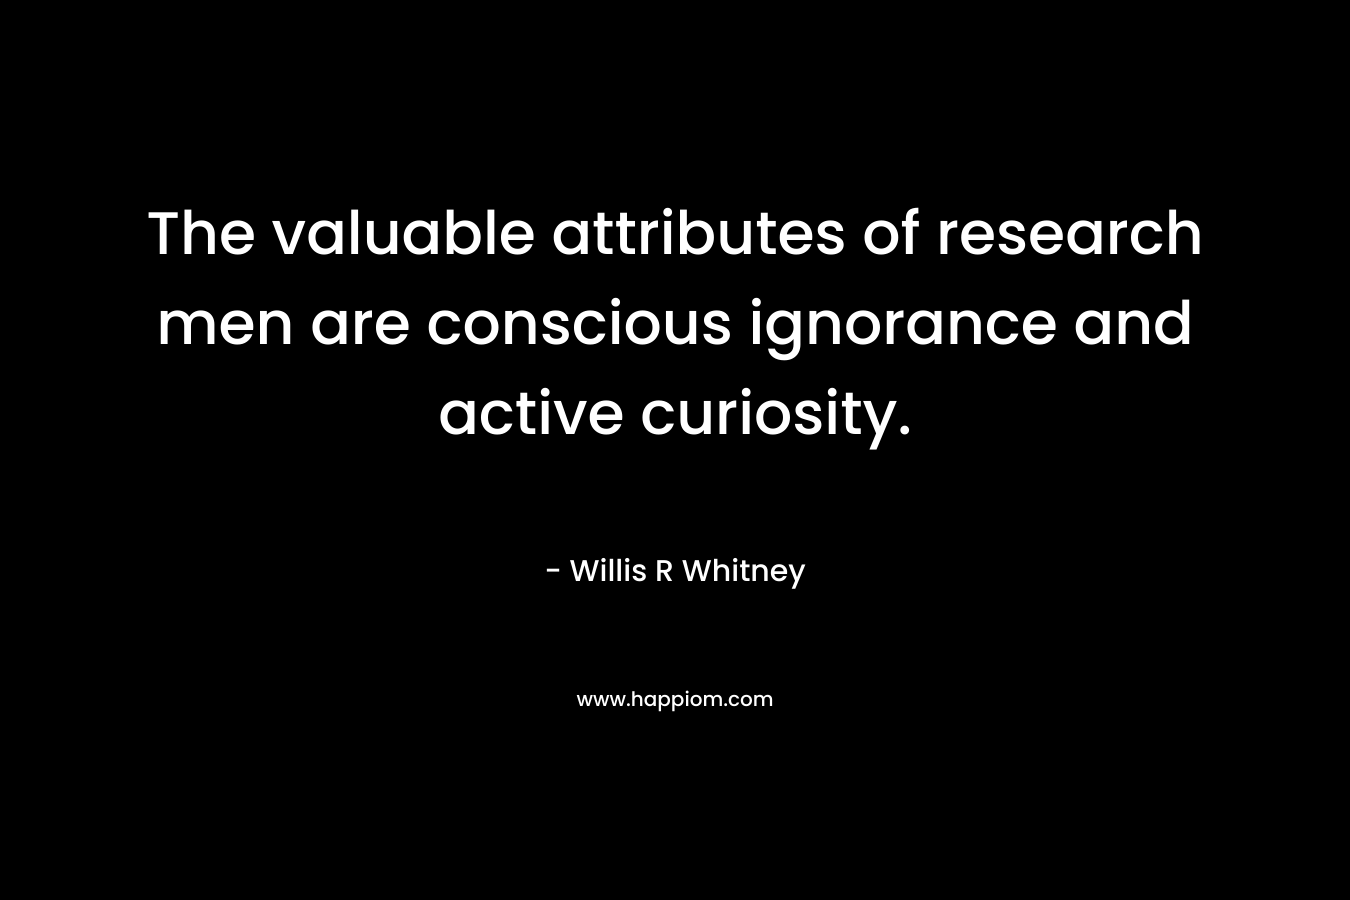 The valuable attributes of research men are conscious ignorance and active curiosity.